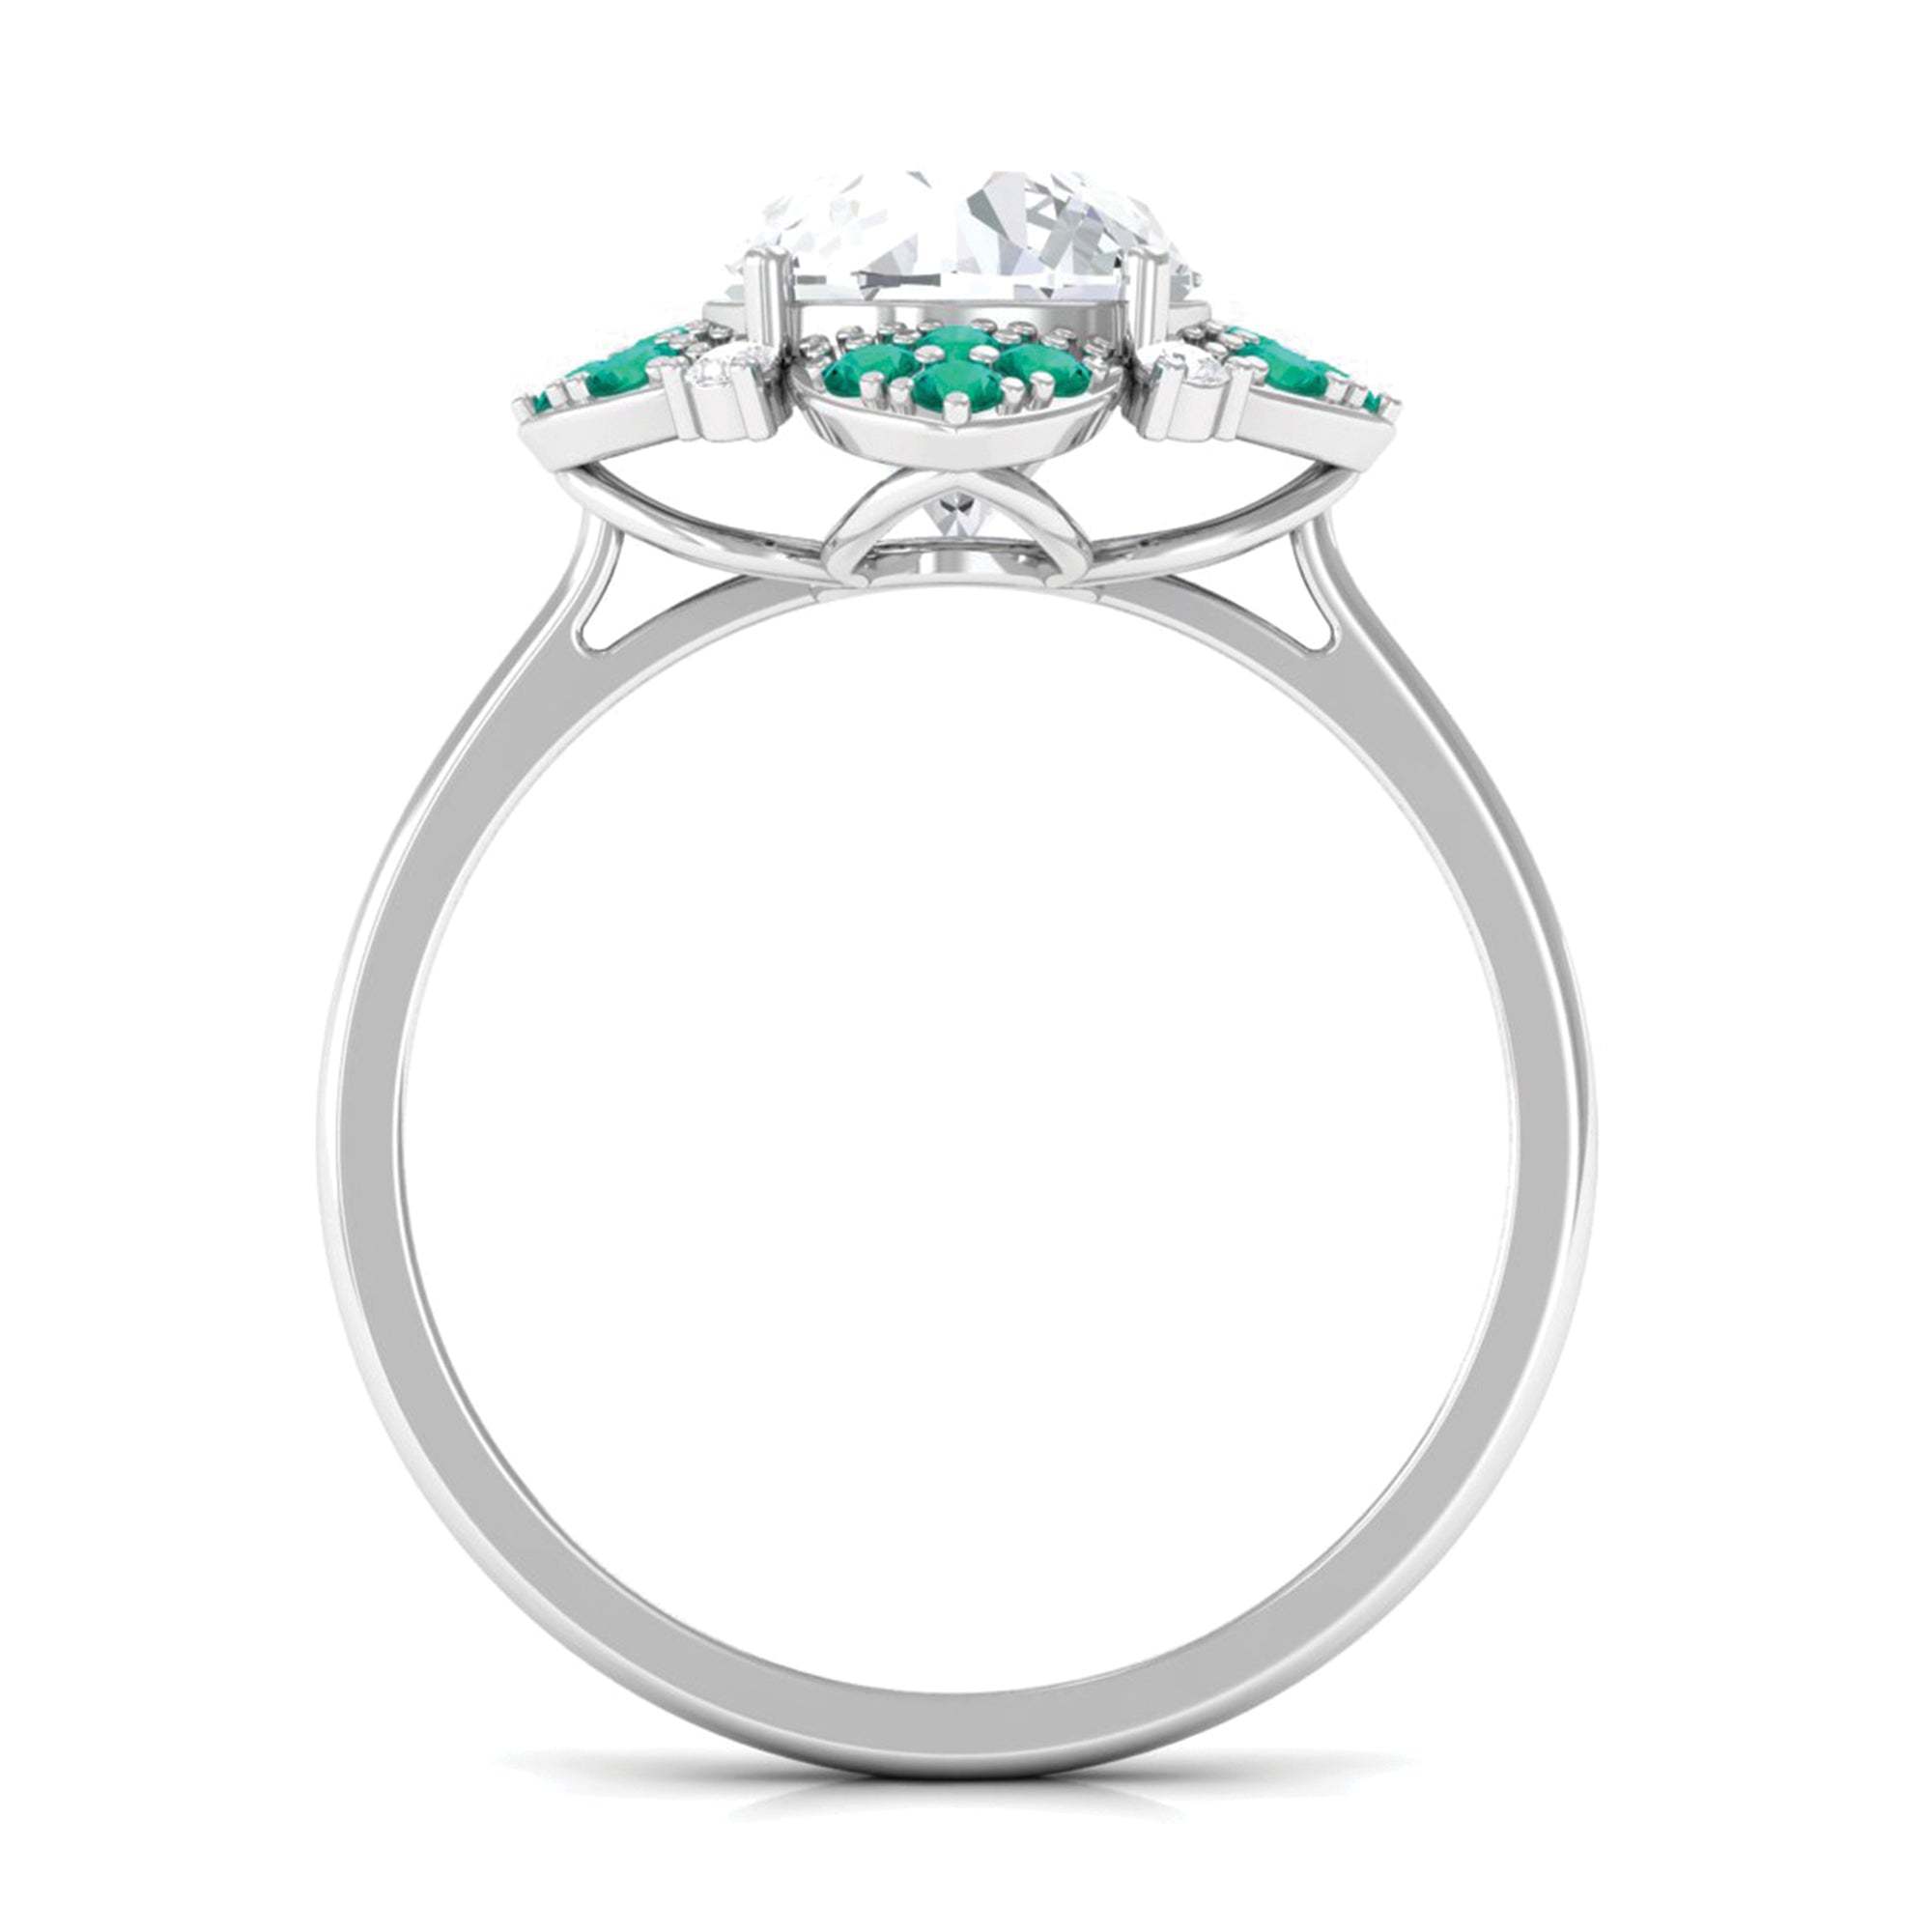 Floral Inspired Moissanite Engagement Ring with Emerald D-VS1 8 MM - Sparkanite Jewels